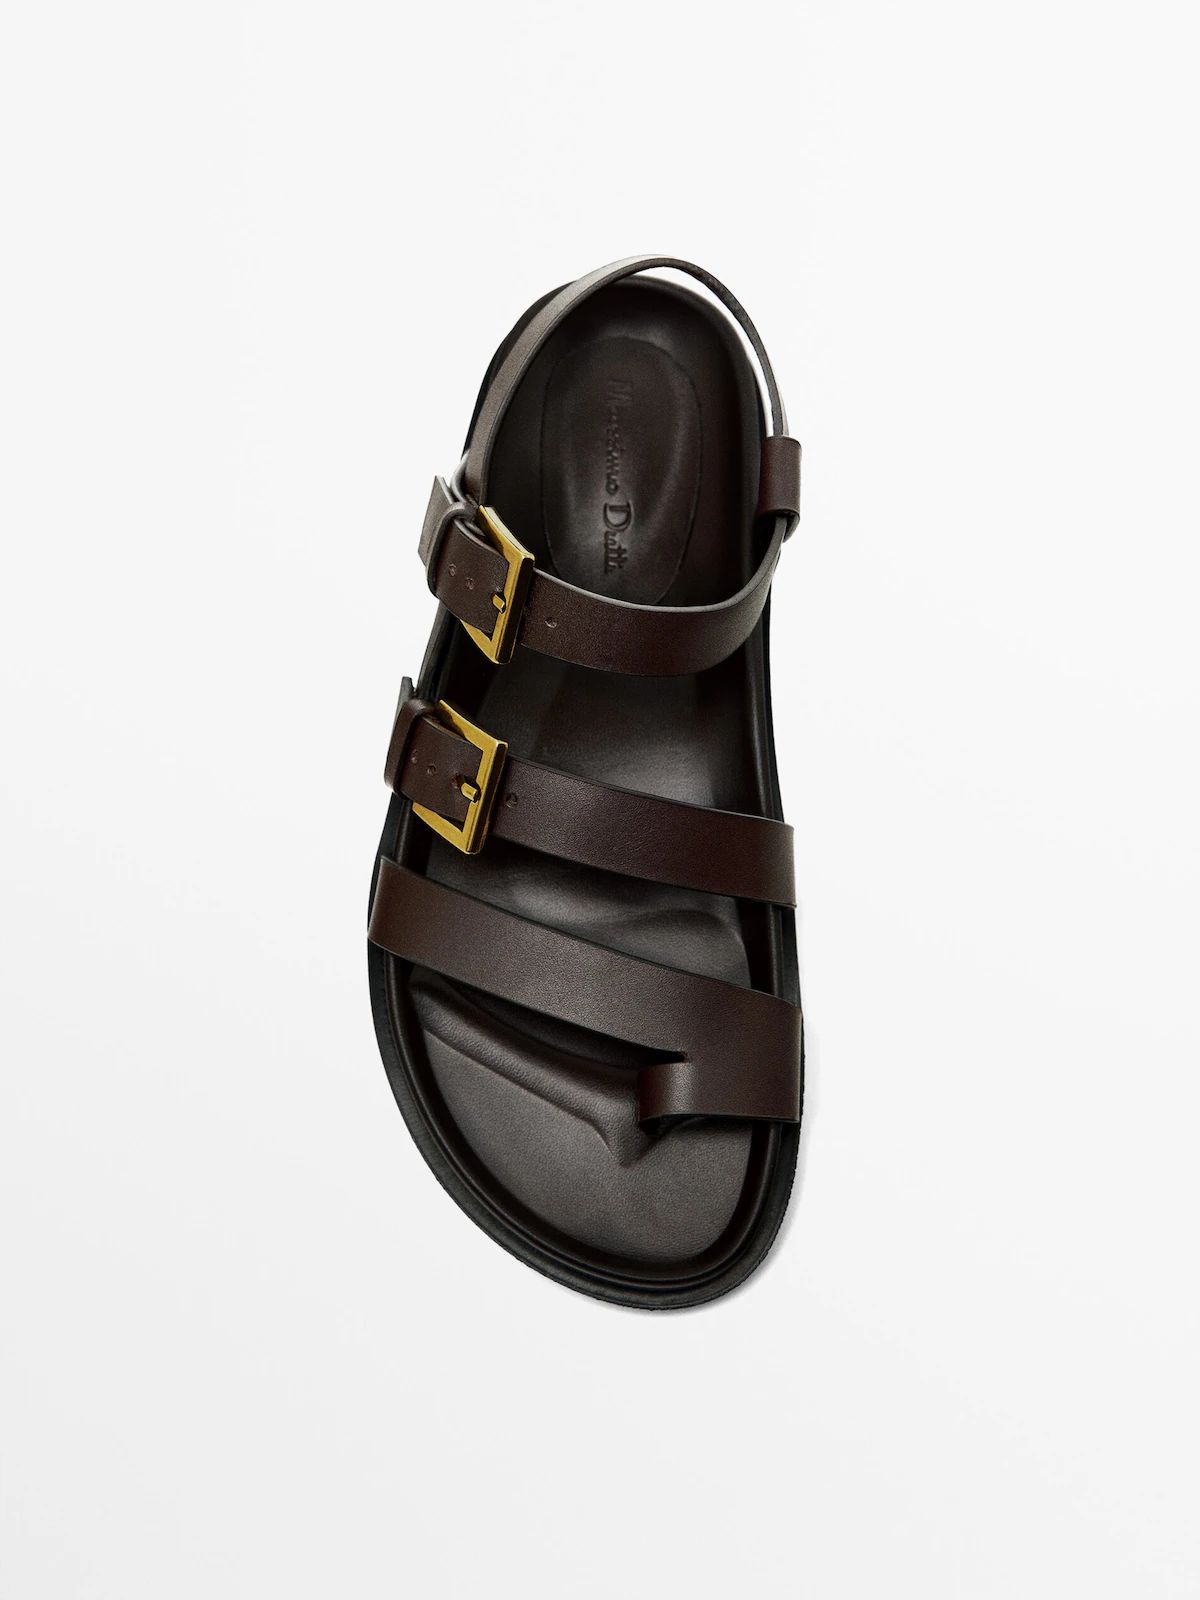 Flat sandals with buckles | Massimo Dutti (US)